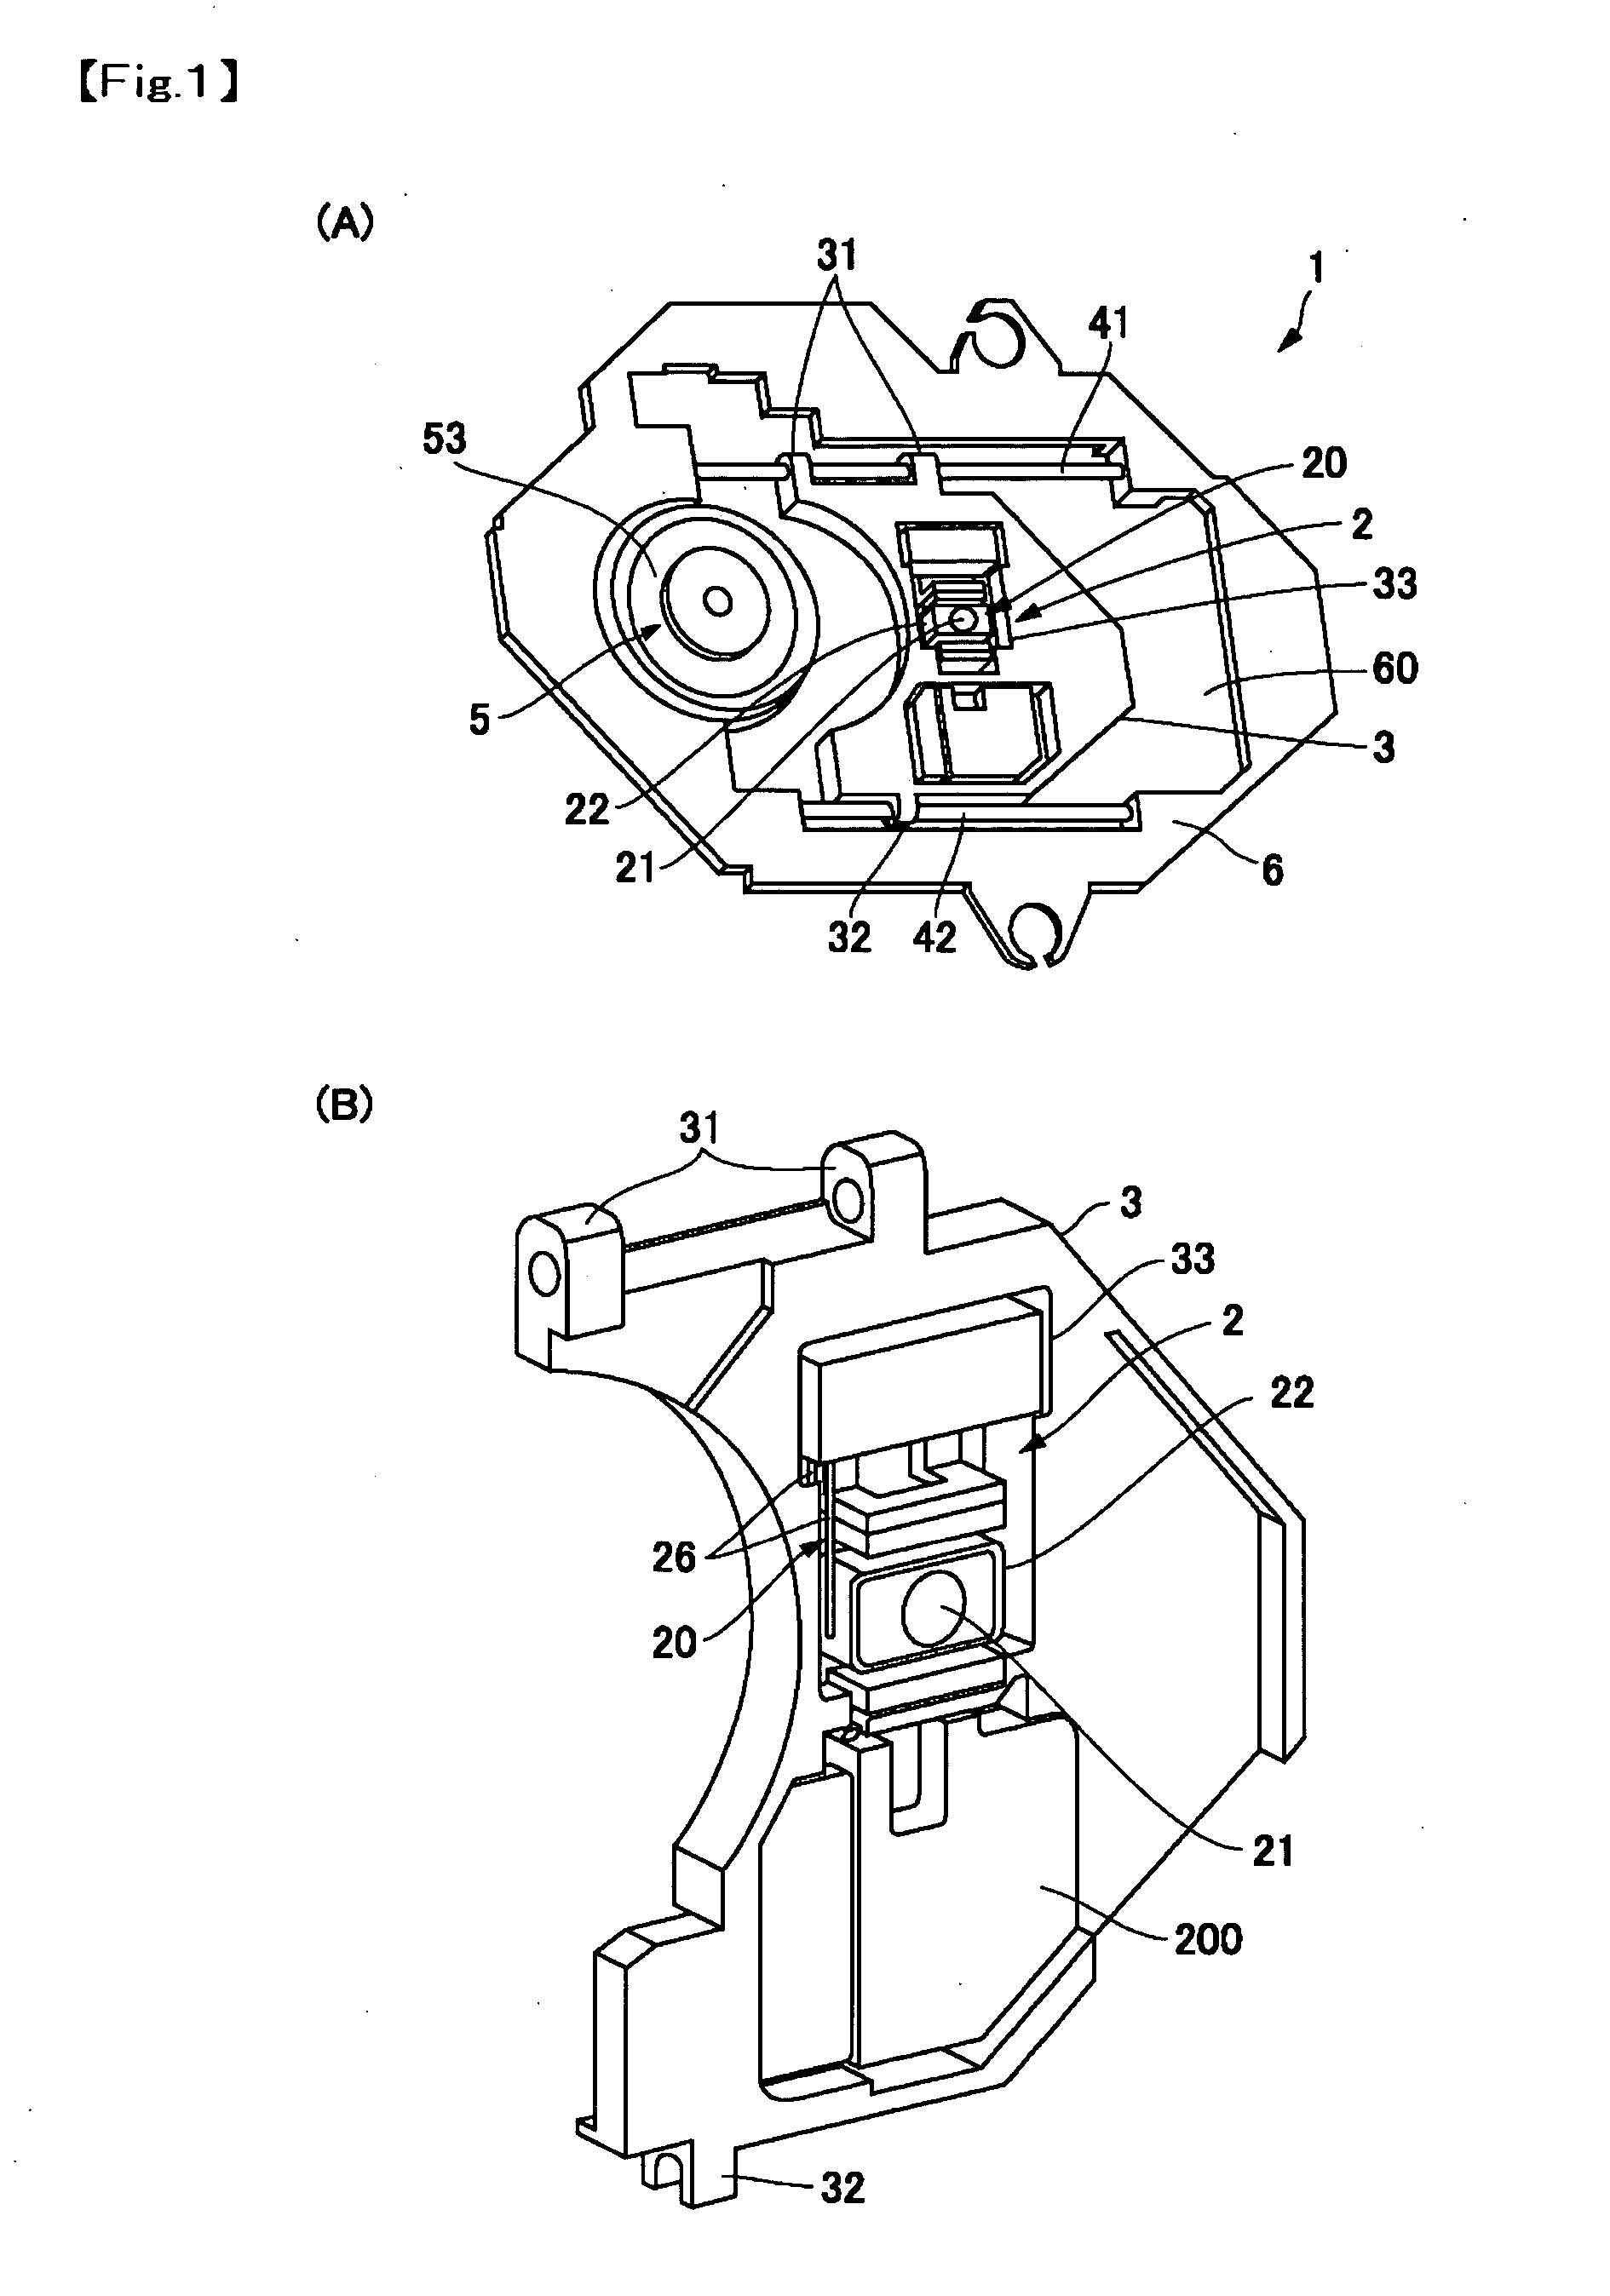 Optical recording disk device and manufacturing method therefor